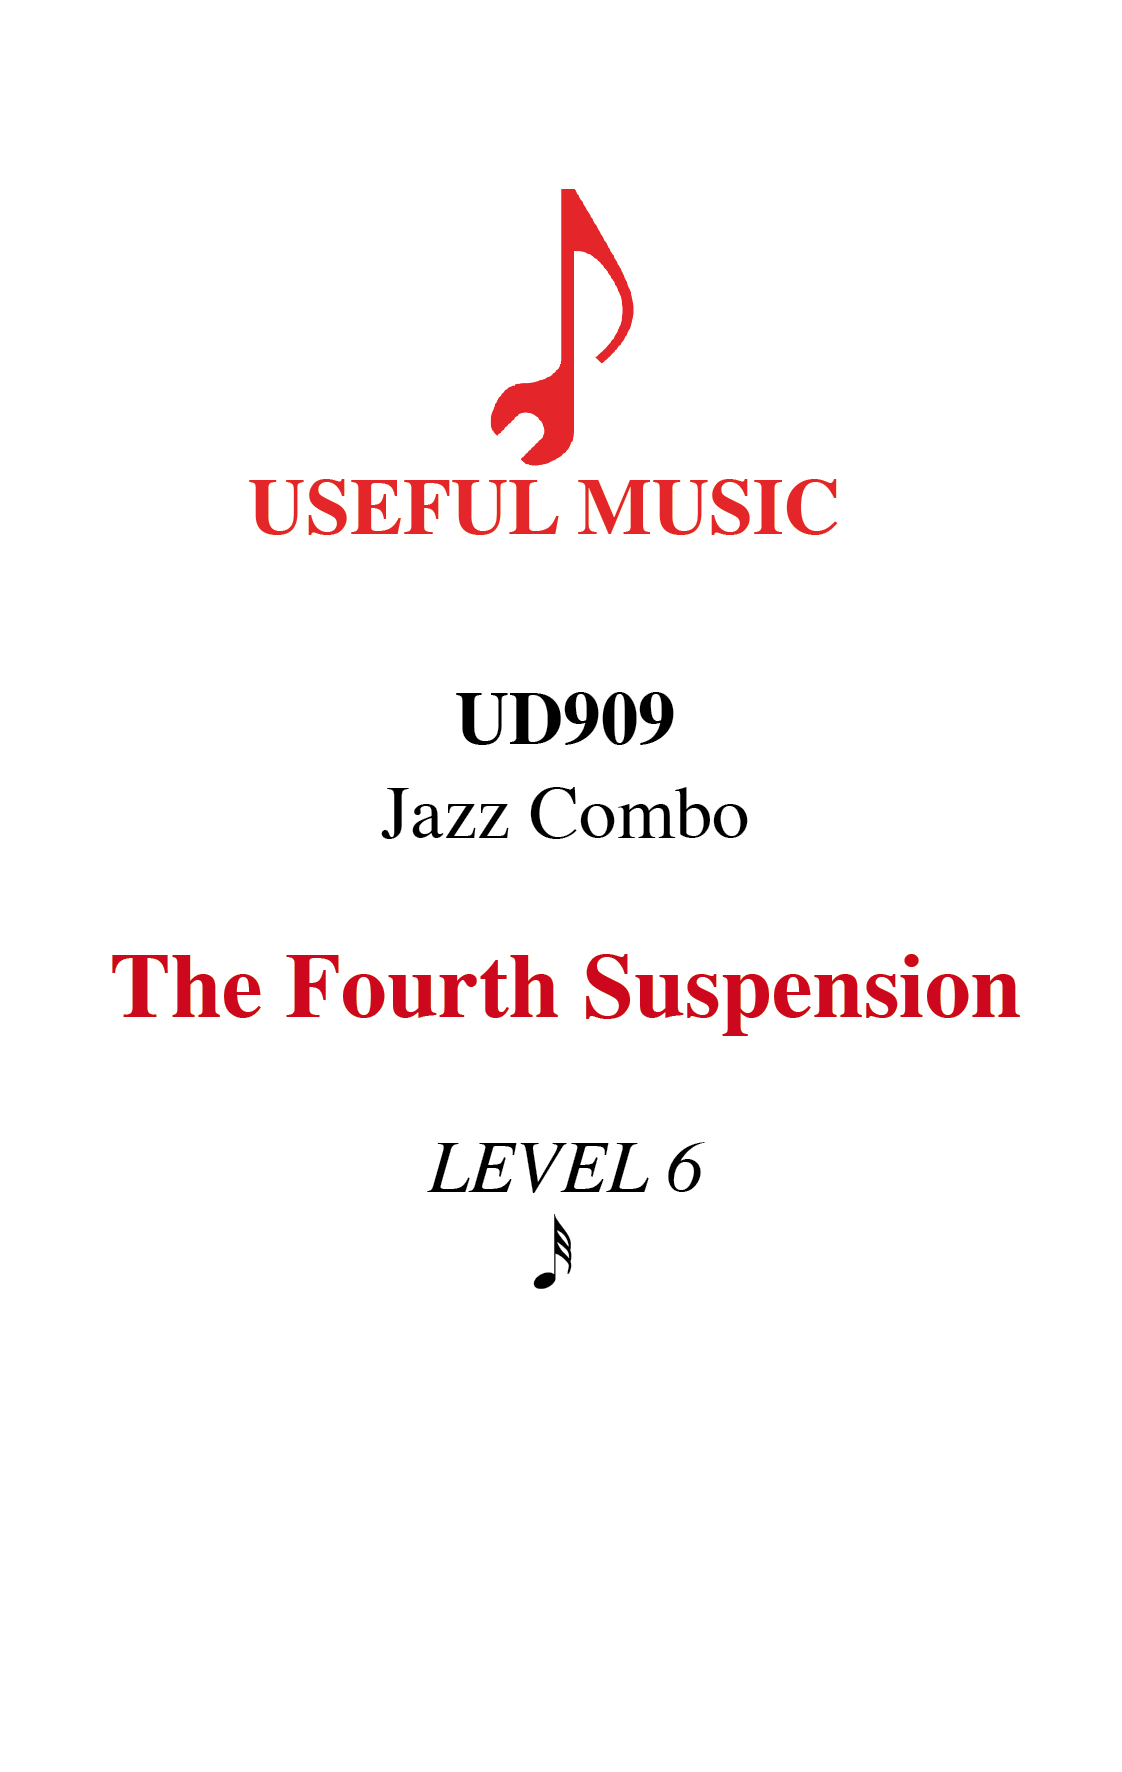 The Fourth Suspension - Jazz Combo